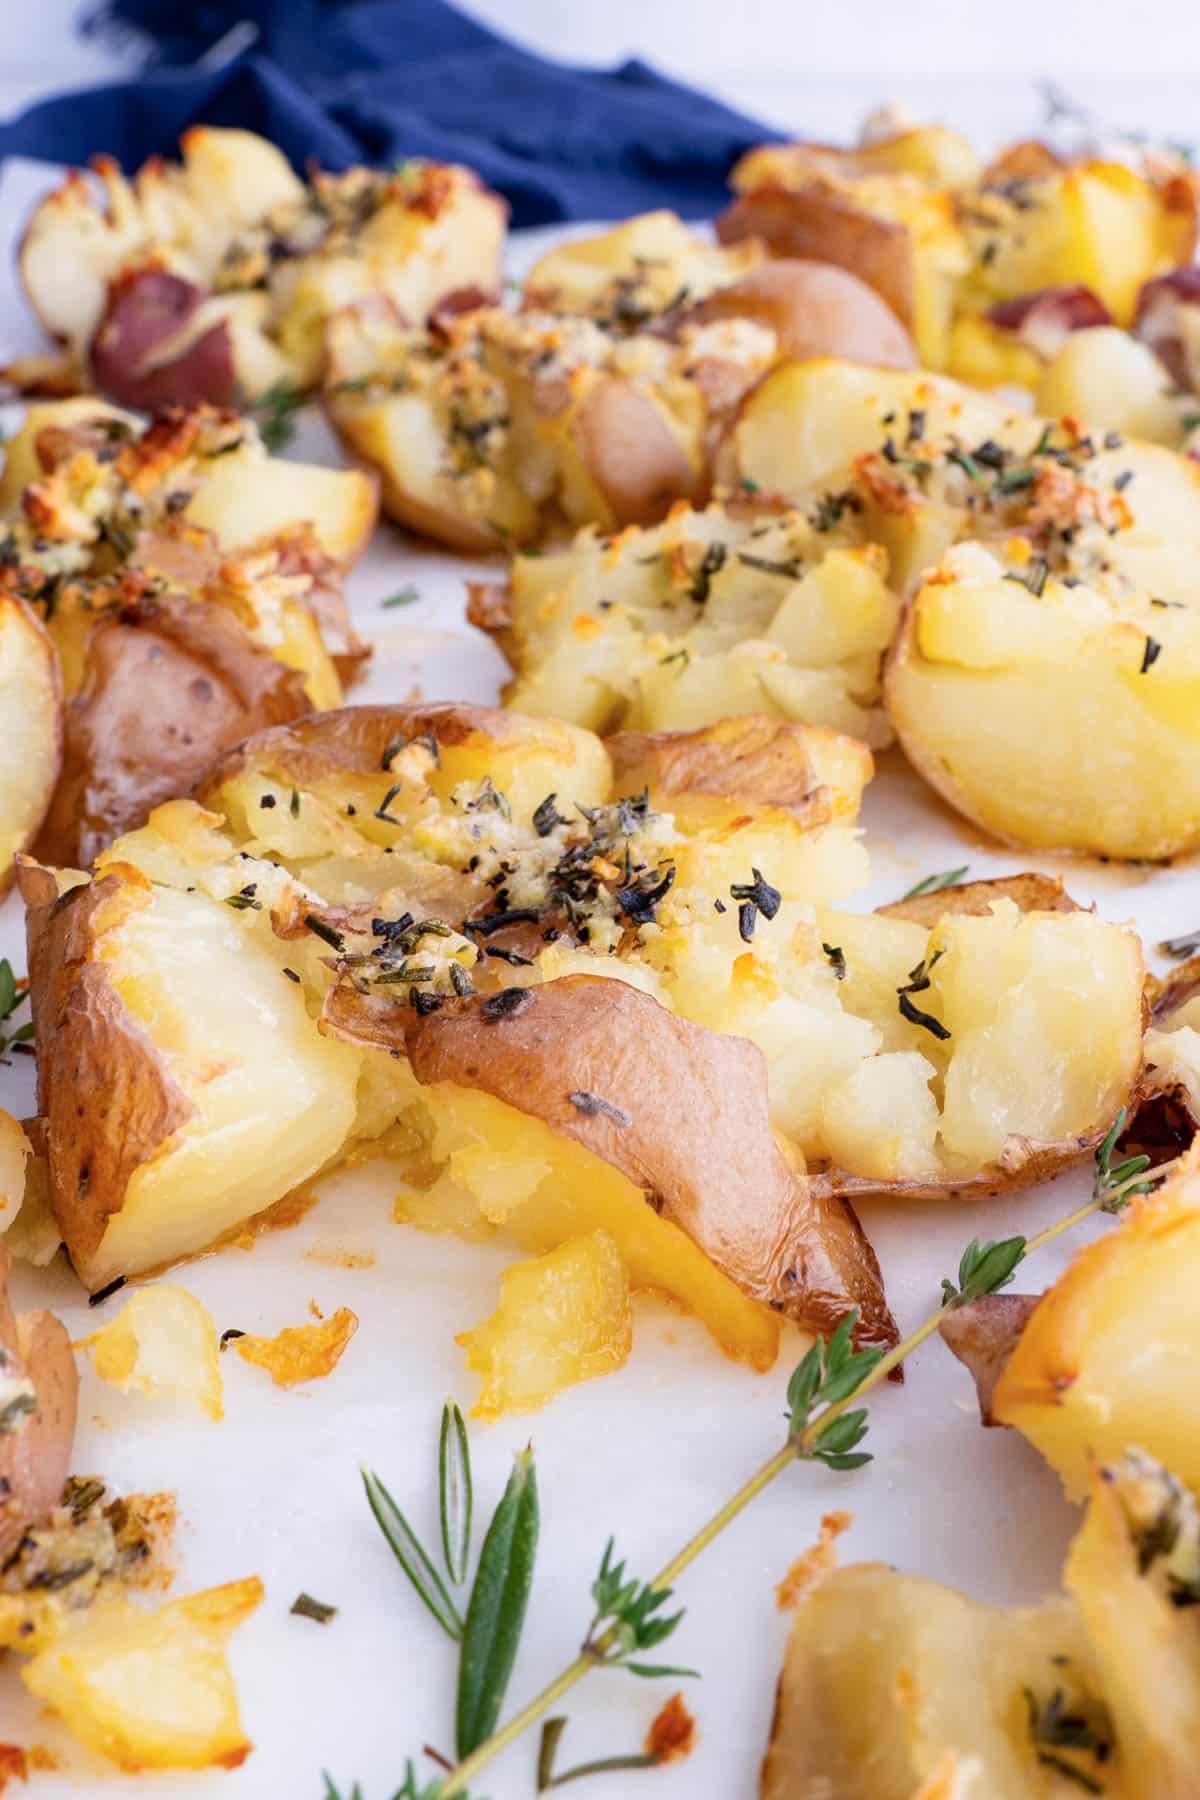 Red potatoes are seasoned with butter and herbs then smashed.